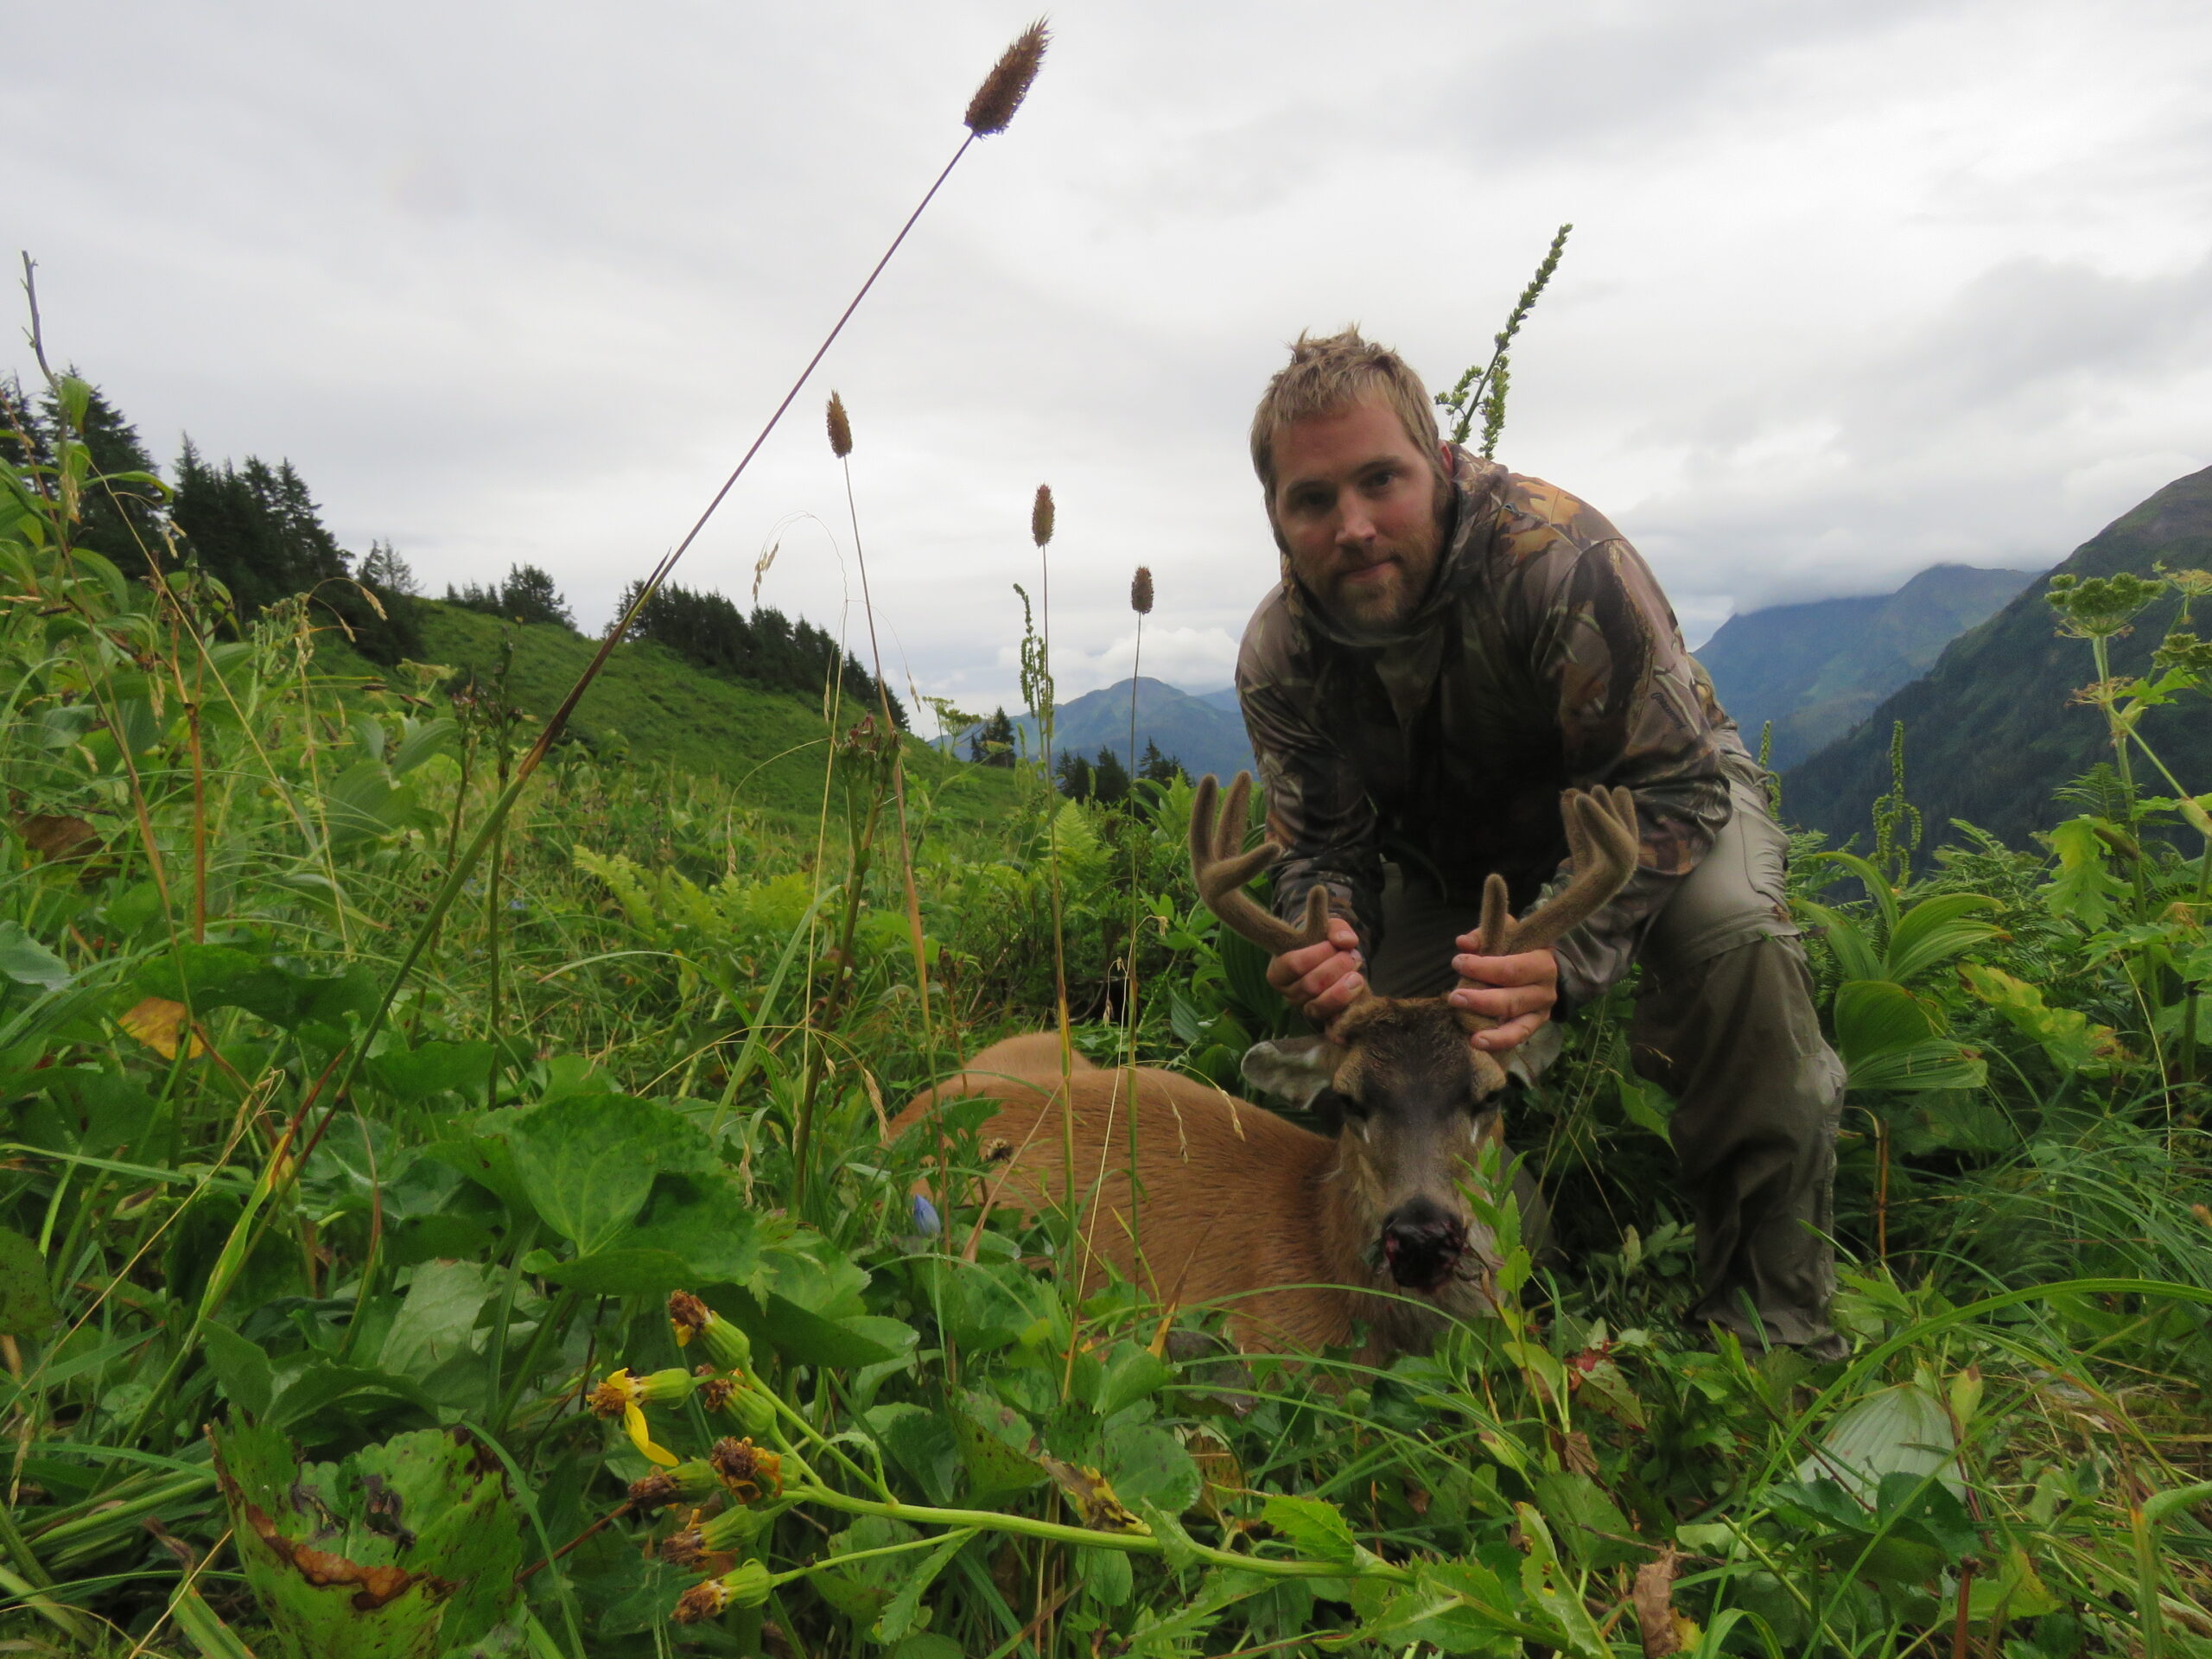 An Alaskan hunter holds up the velvet antlers of a Sitka blacktail buck in a green field in the mountains.